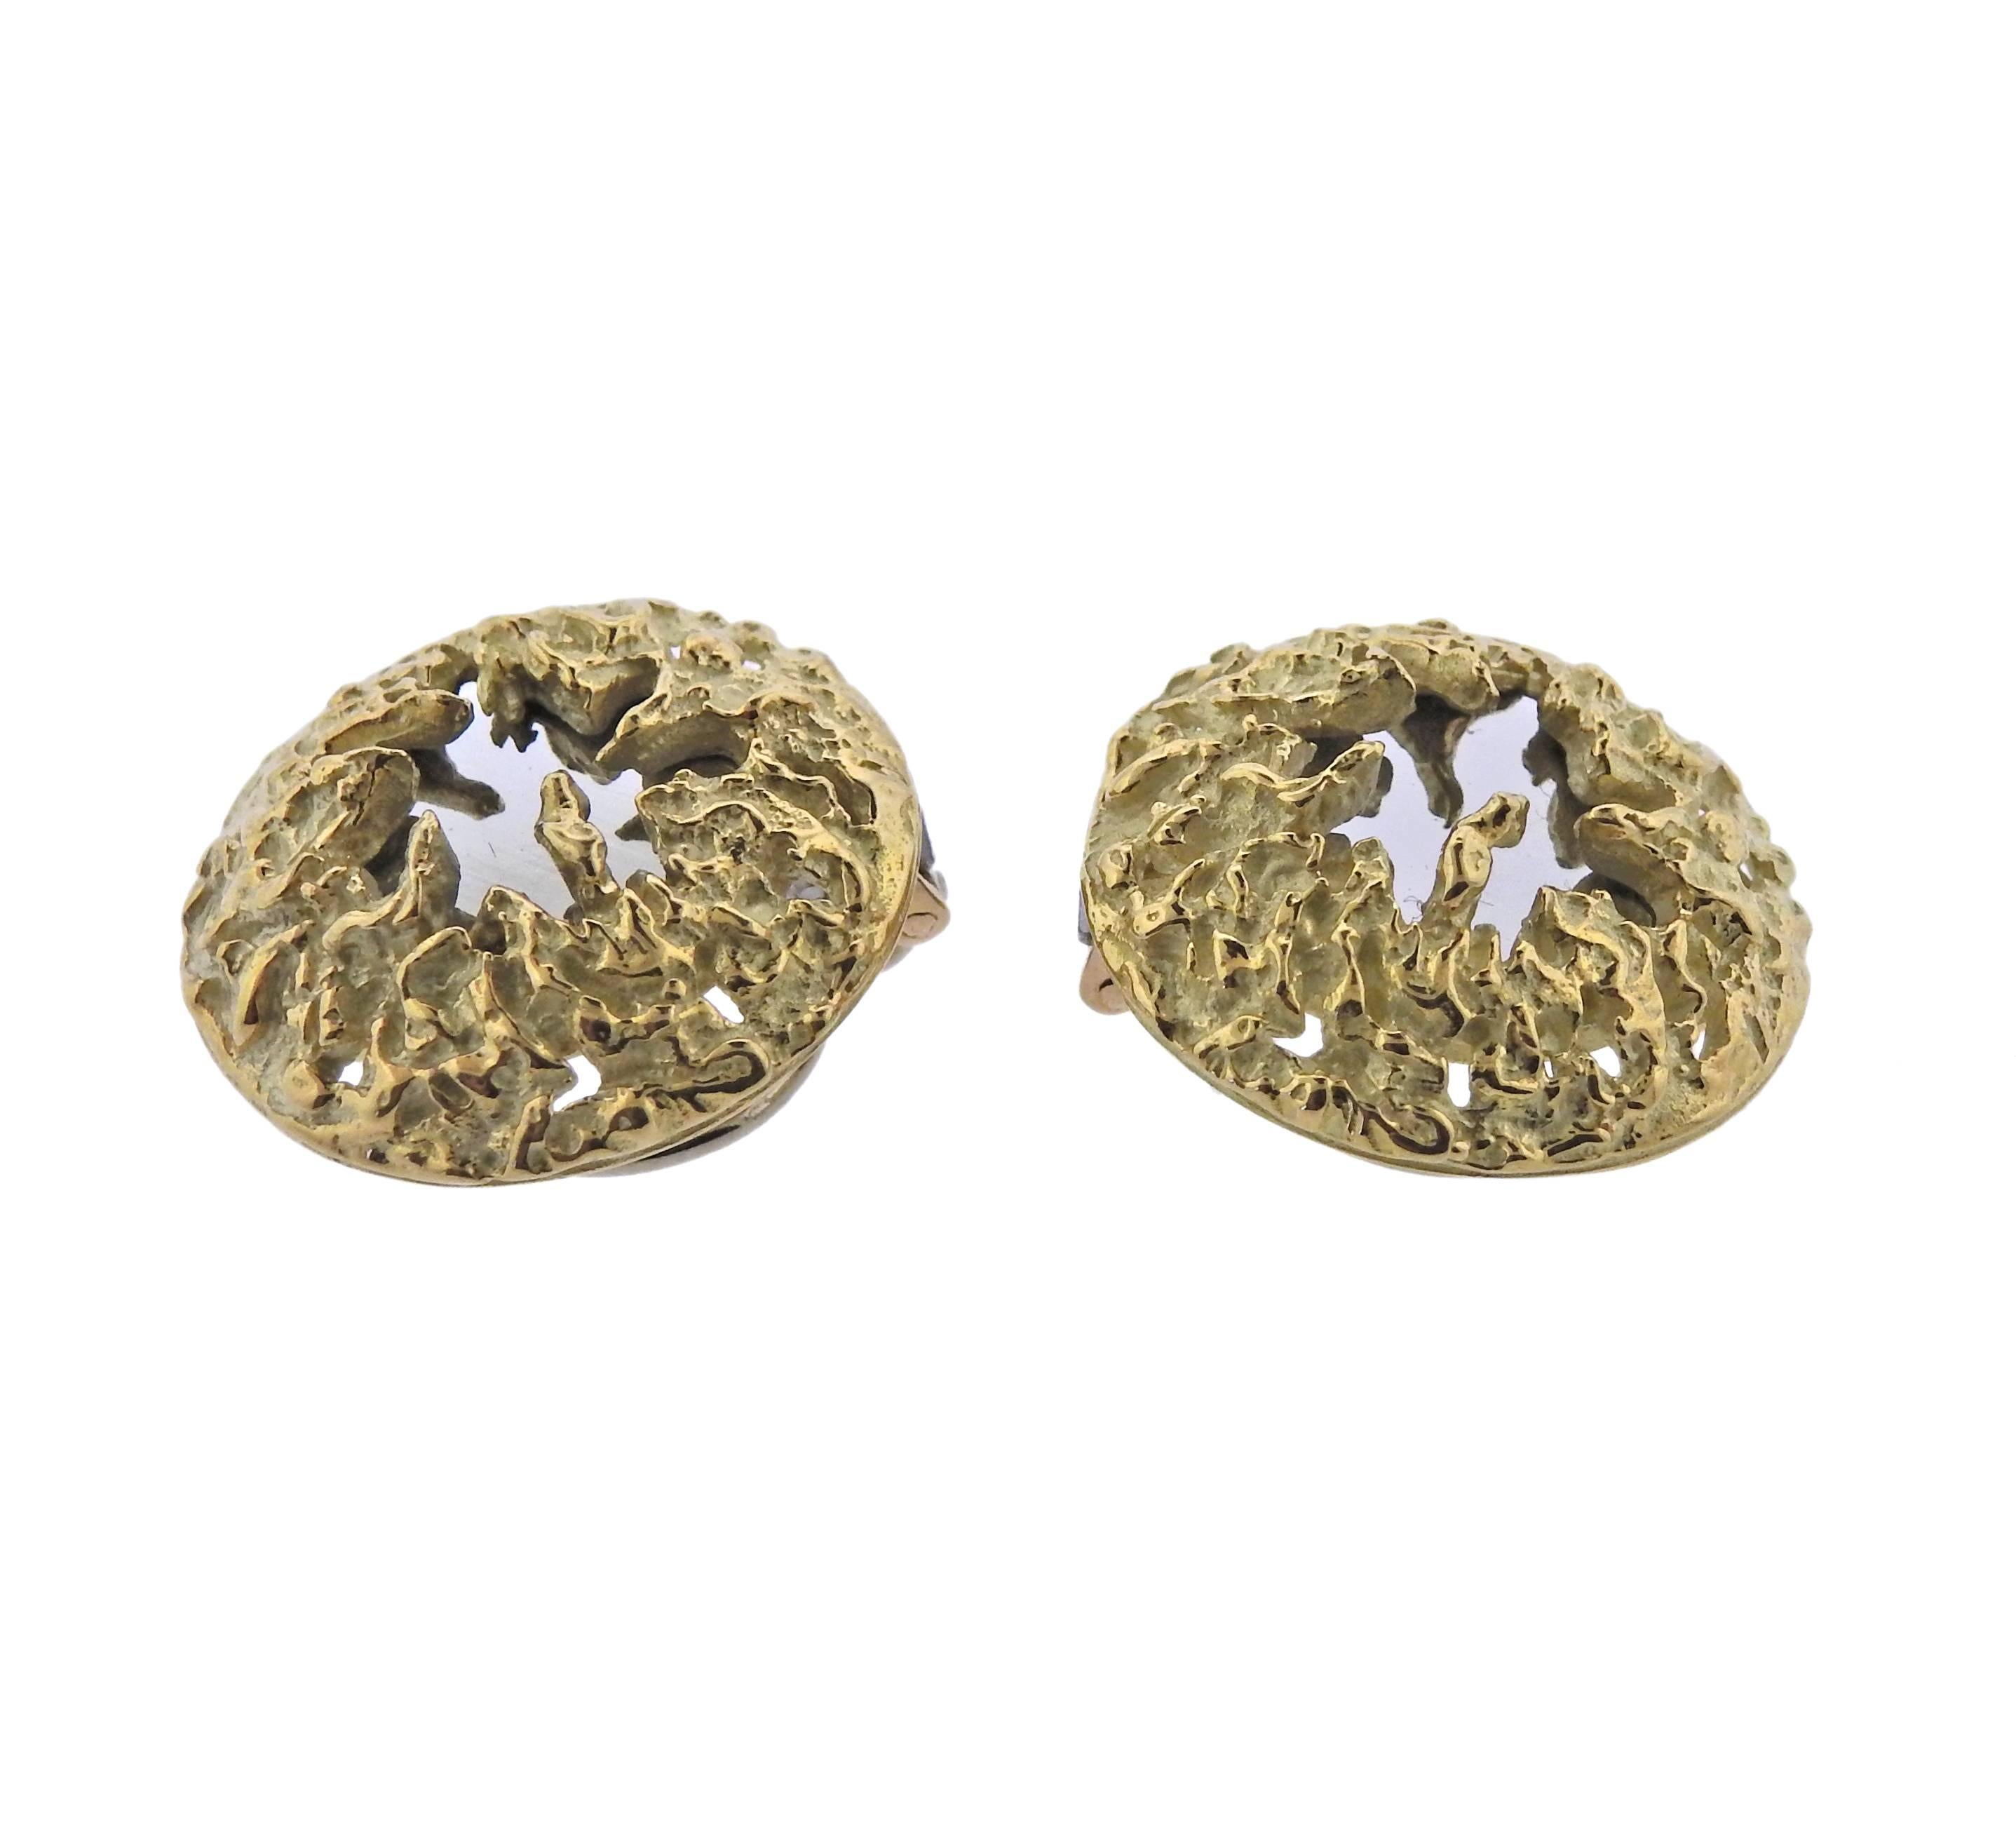 Pair of 18k yellow gold earrings, crafted by Chaumet. Earrings are 22mm in diameter and weigh 16.5 grams. Marked: Chaumet Paris. 